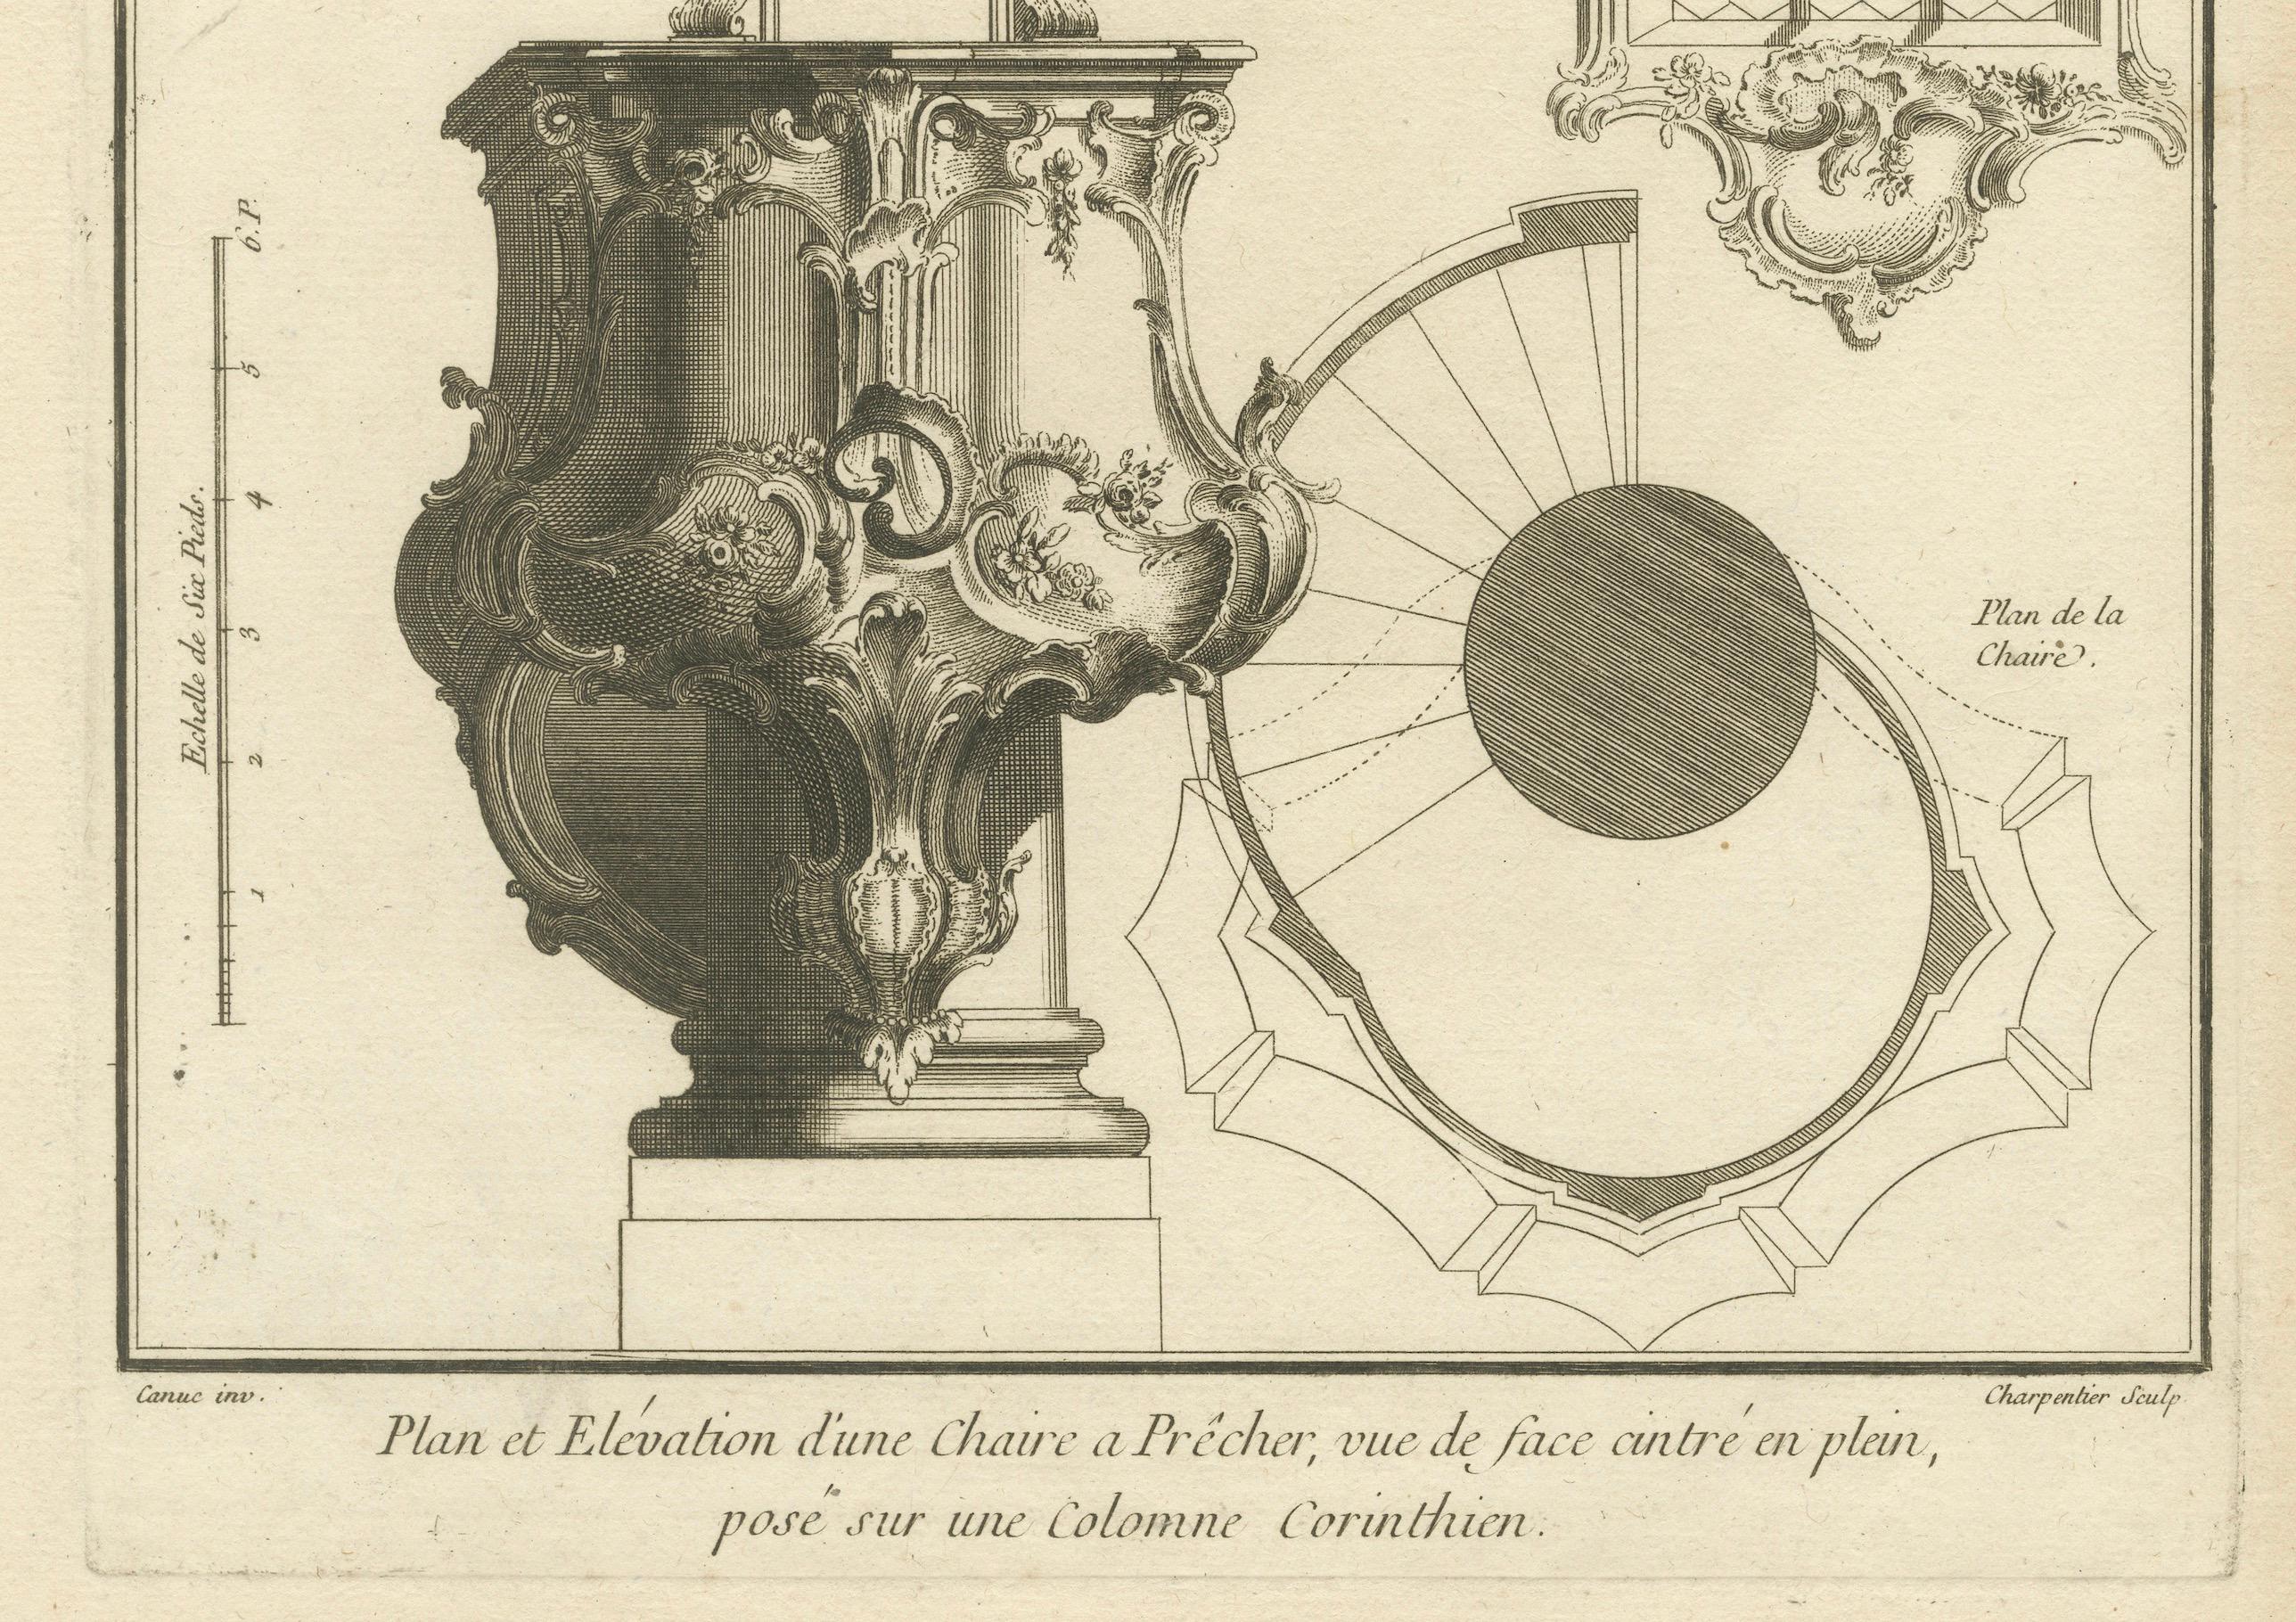 Architectural design with the central elements depicted in the engraving: the Baroque design of the pulpit, the inclusion of a Corinthian column which suggests a classical influence, and the presence of a staircase plan indicating the approach to